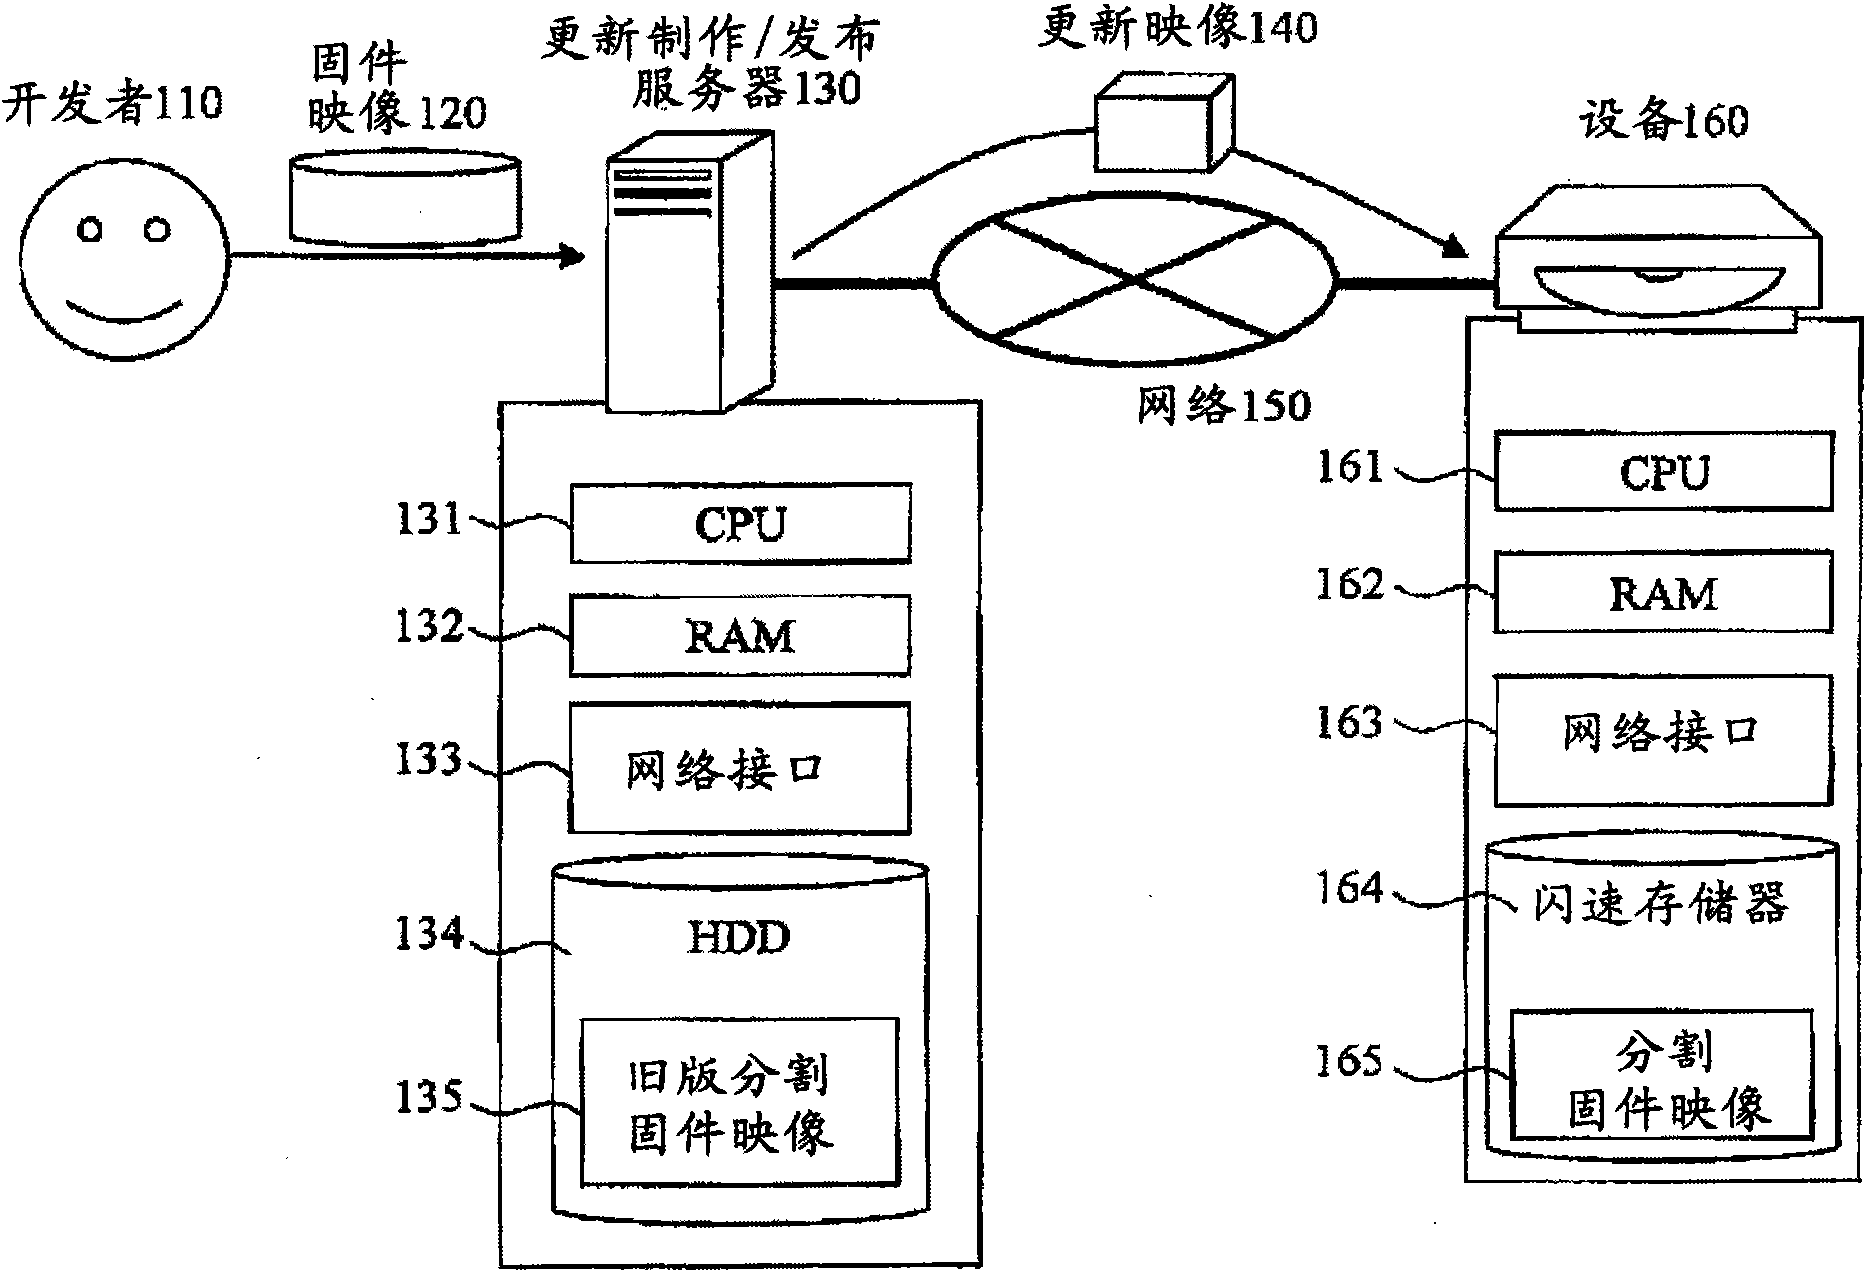 Firmware updating system, firmware delivering server, firmware incorporating device, and program